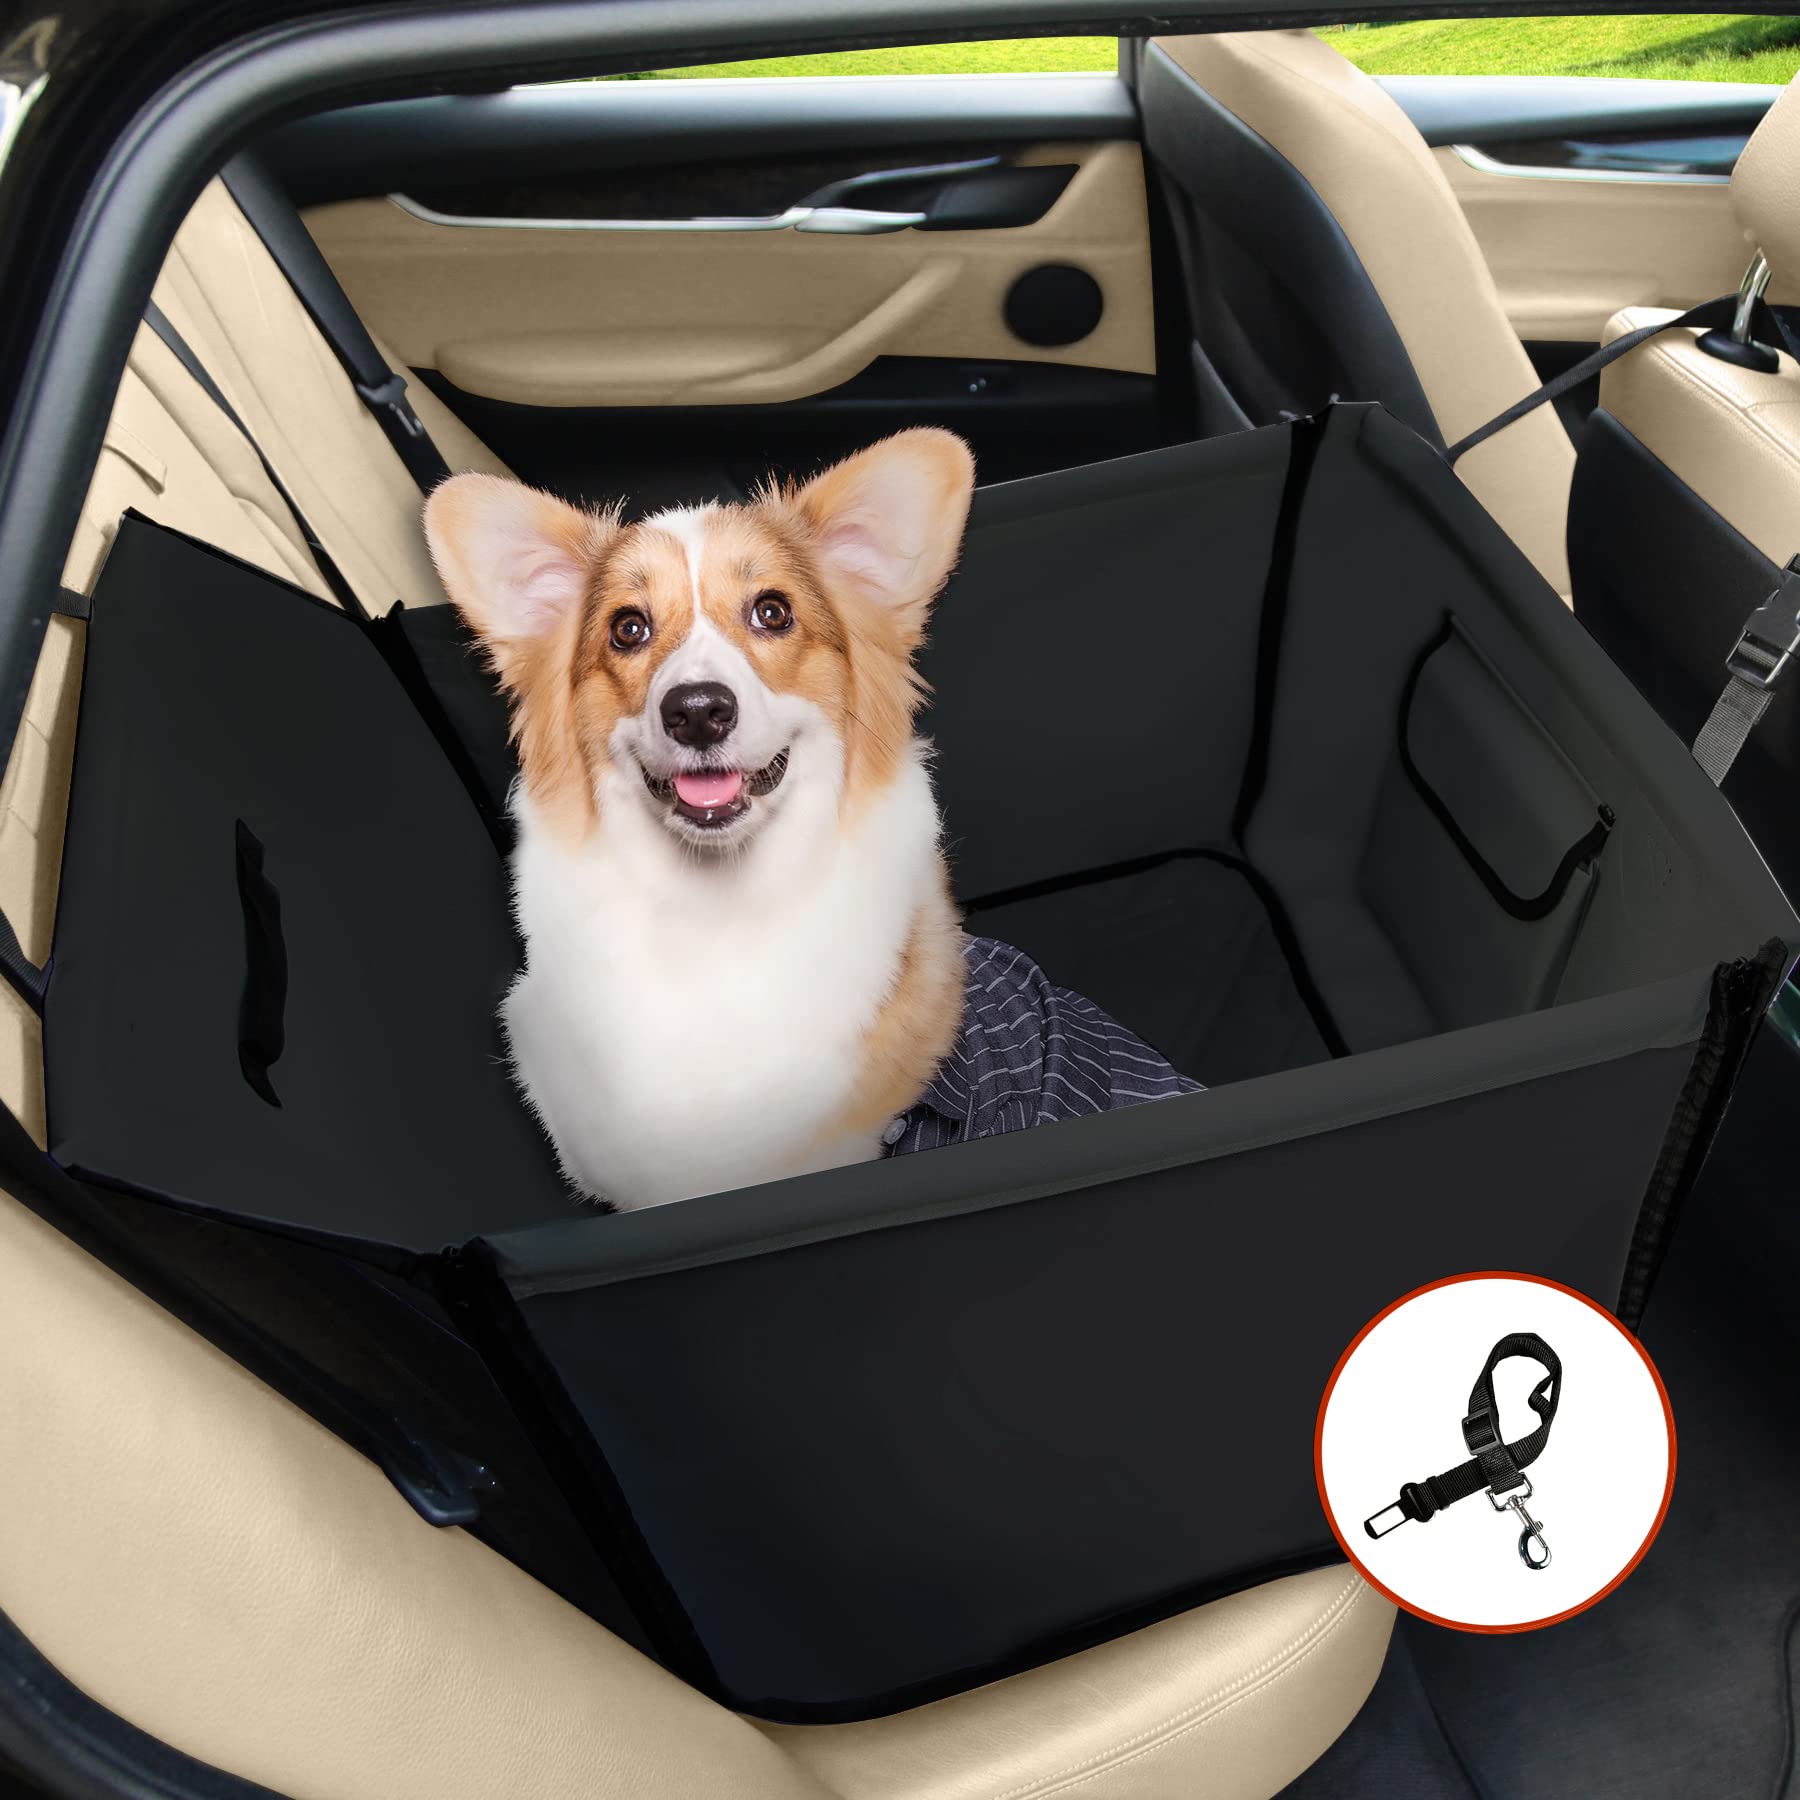 Winbate Dog car Seat for Small and Medium Dogs Waterproof Scratchproof Sturdy Rear Dog Booster Seat Dog Hammock car Seat with Do